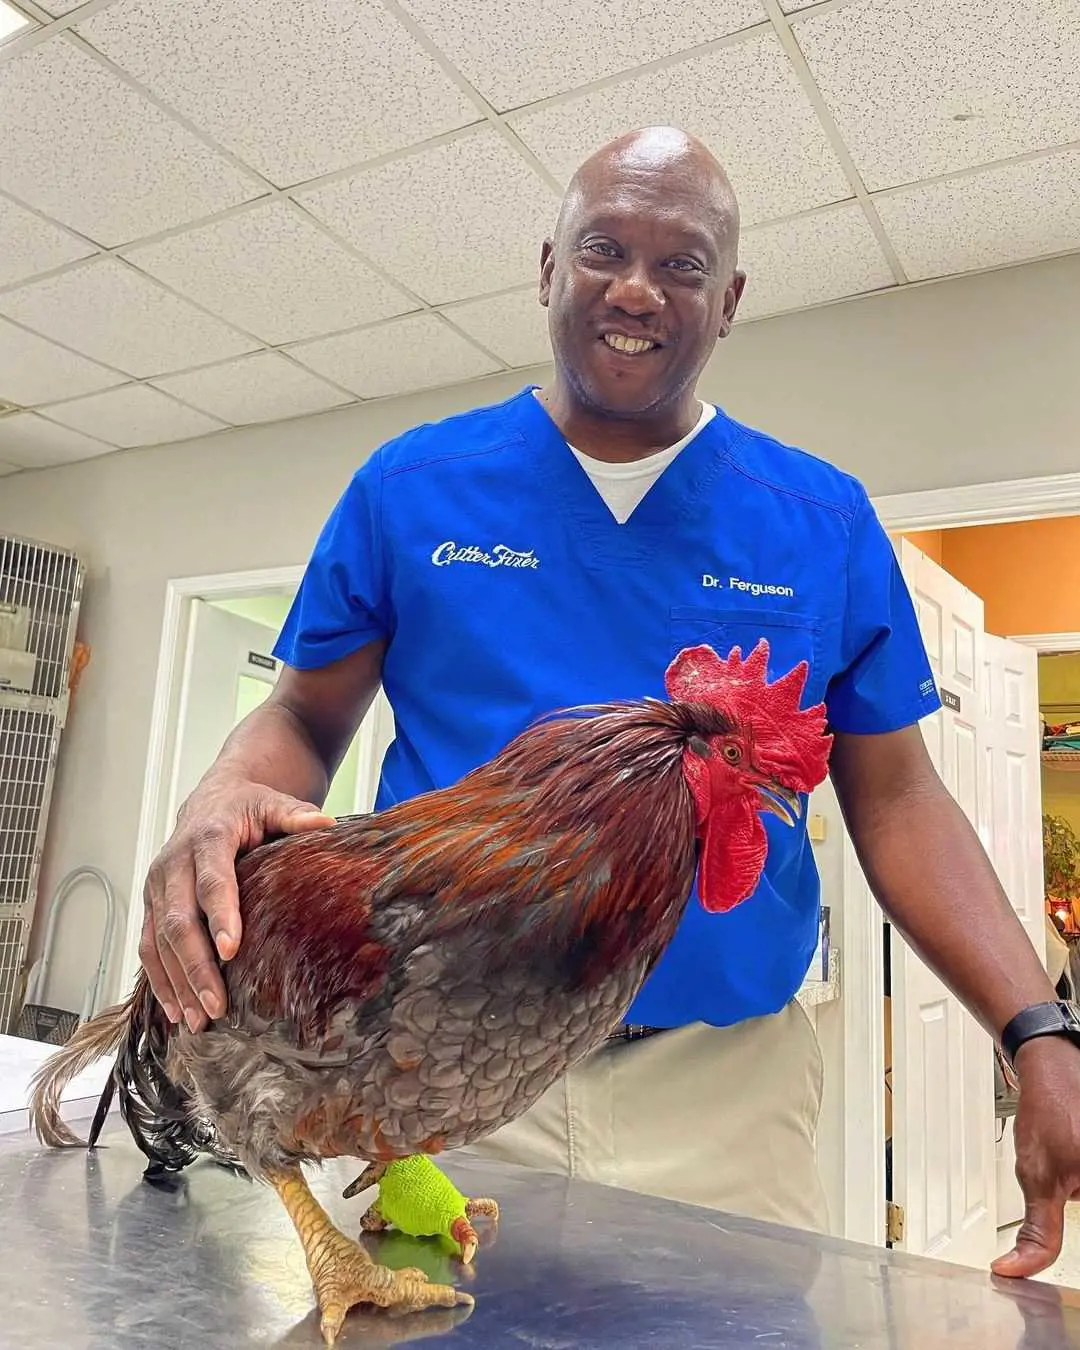 Ferguson was able to treat a Rooster by removing one of his toes; the toe that was removed was infected and suffering from Osteolysis